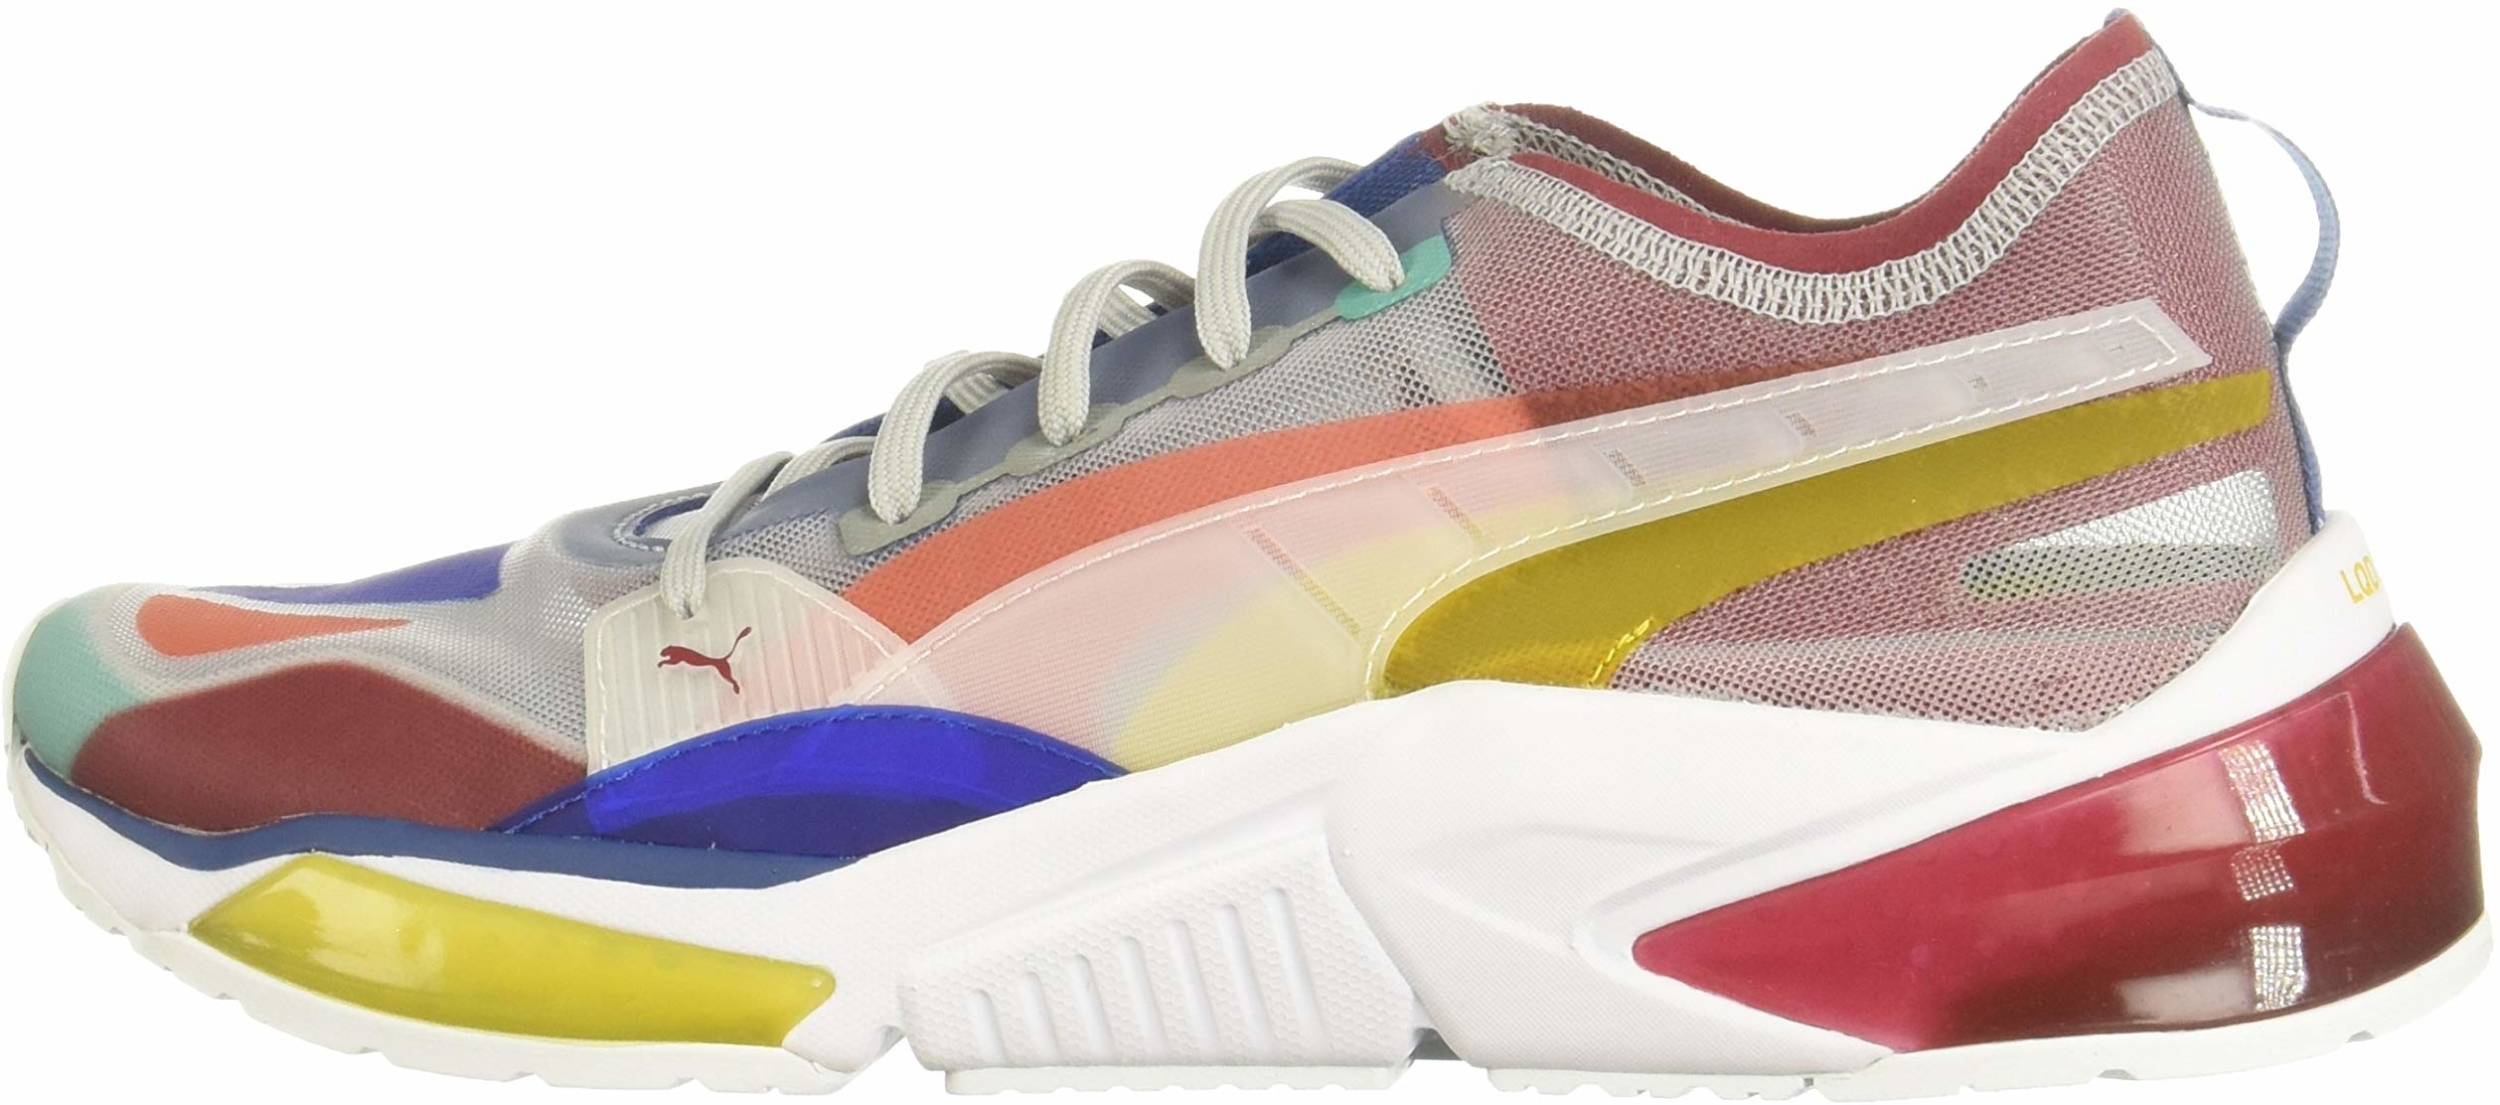 Puma LQDCELL Optic Sheer sneakers in 3 colors (only $70) | RunRepeat